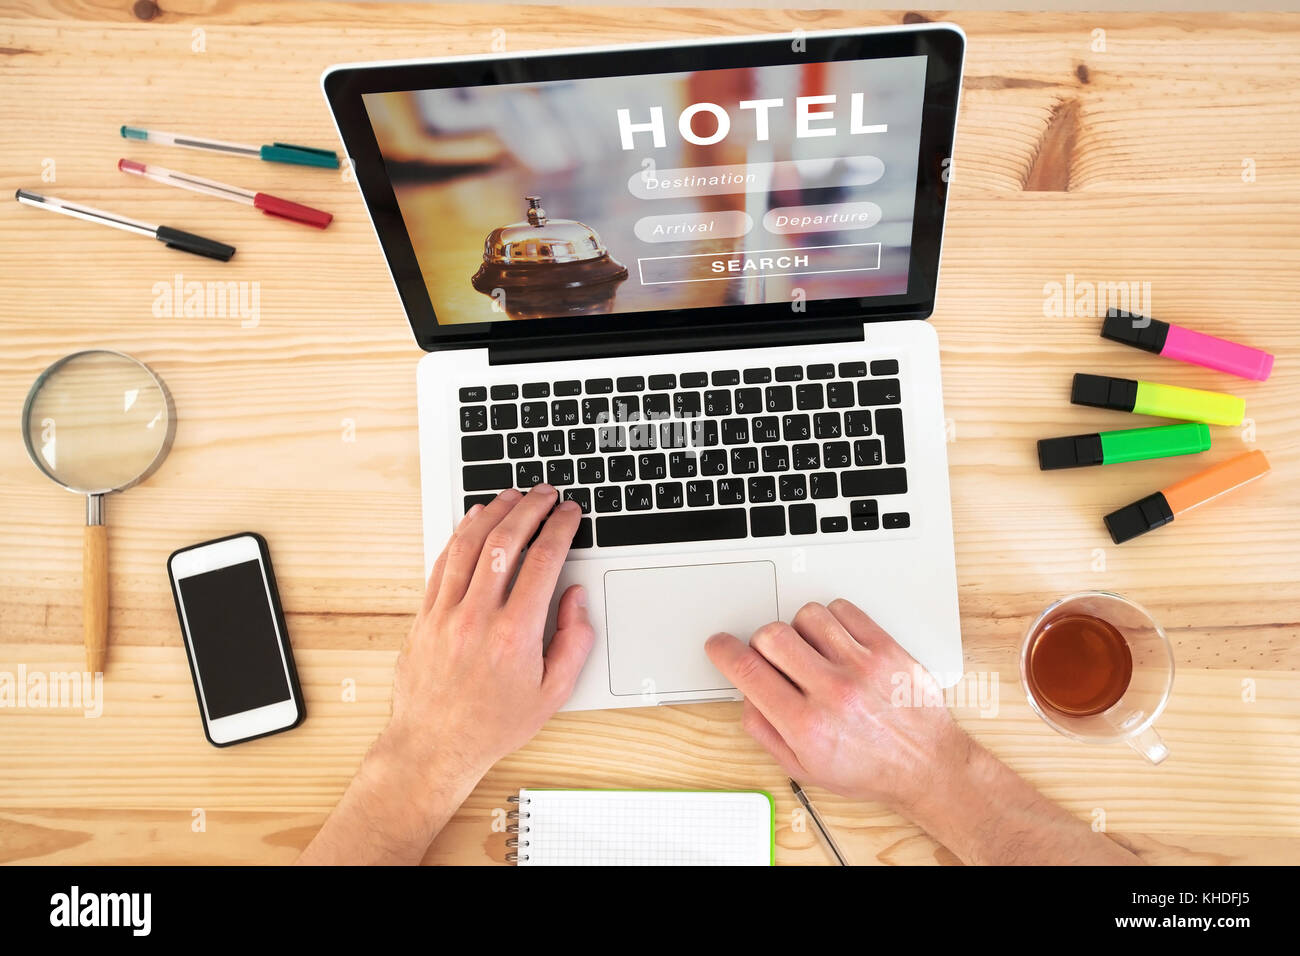 hotel booking on internet, online reservation on the screen of computer Stock Photo